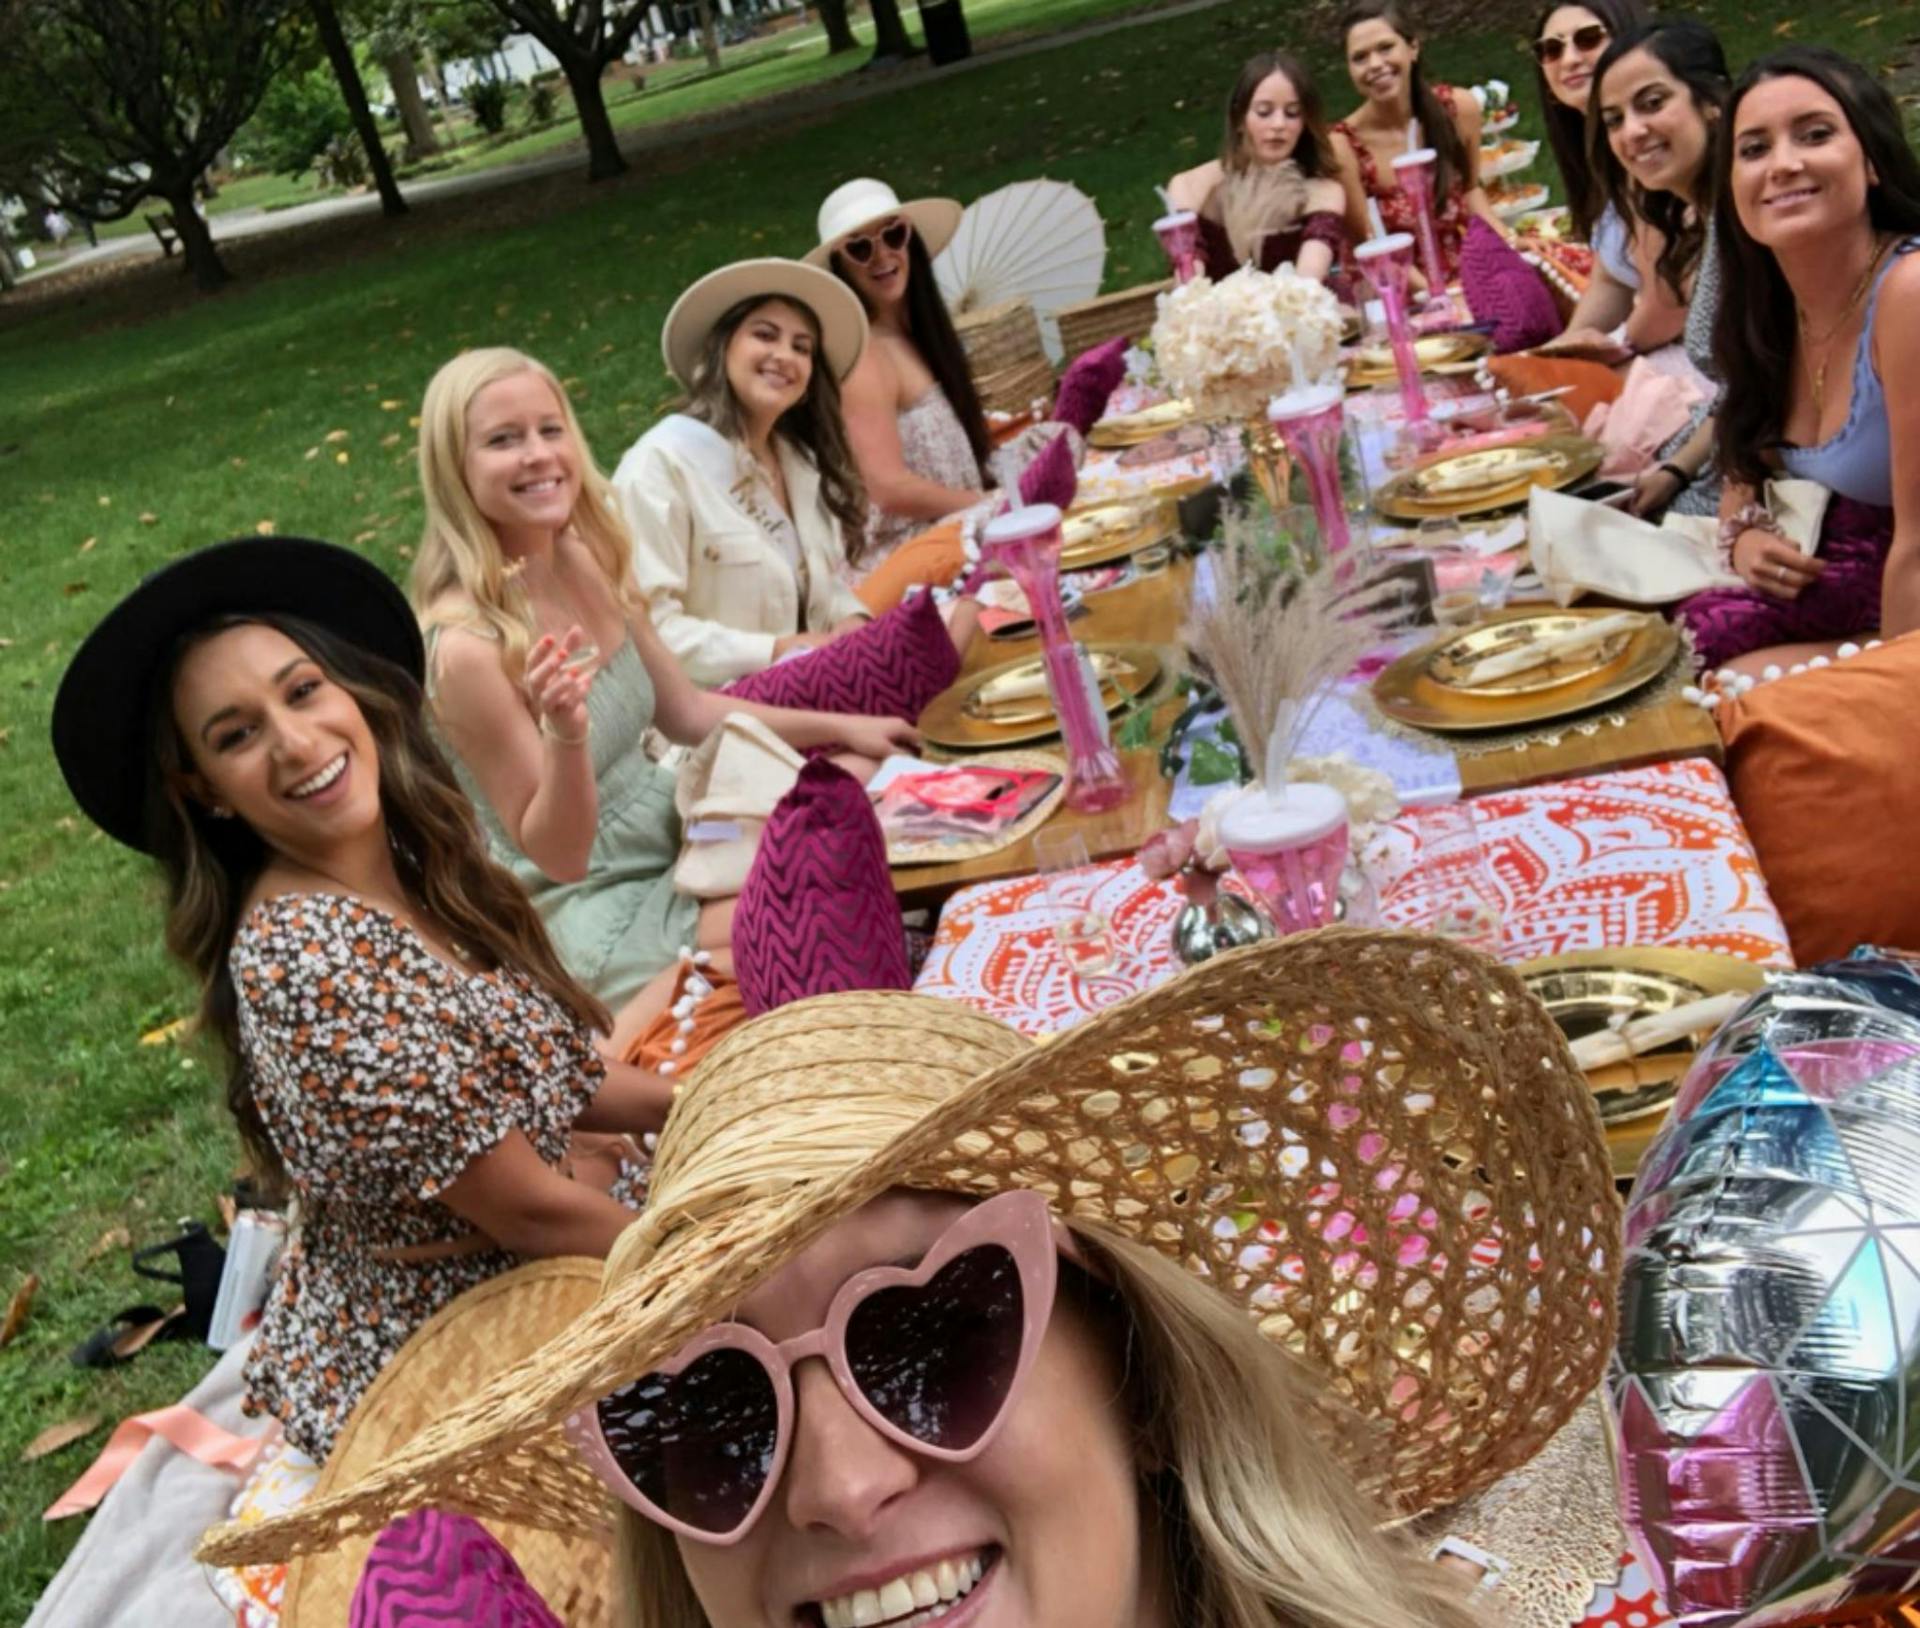 Forsyth Park Luxury Picnic Party with Charcuterie, Juices, BYOB and Optional Wine, Mini-Keg, & Souvenir Add-ons image 21